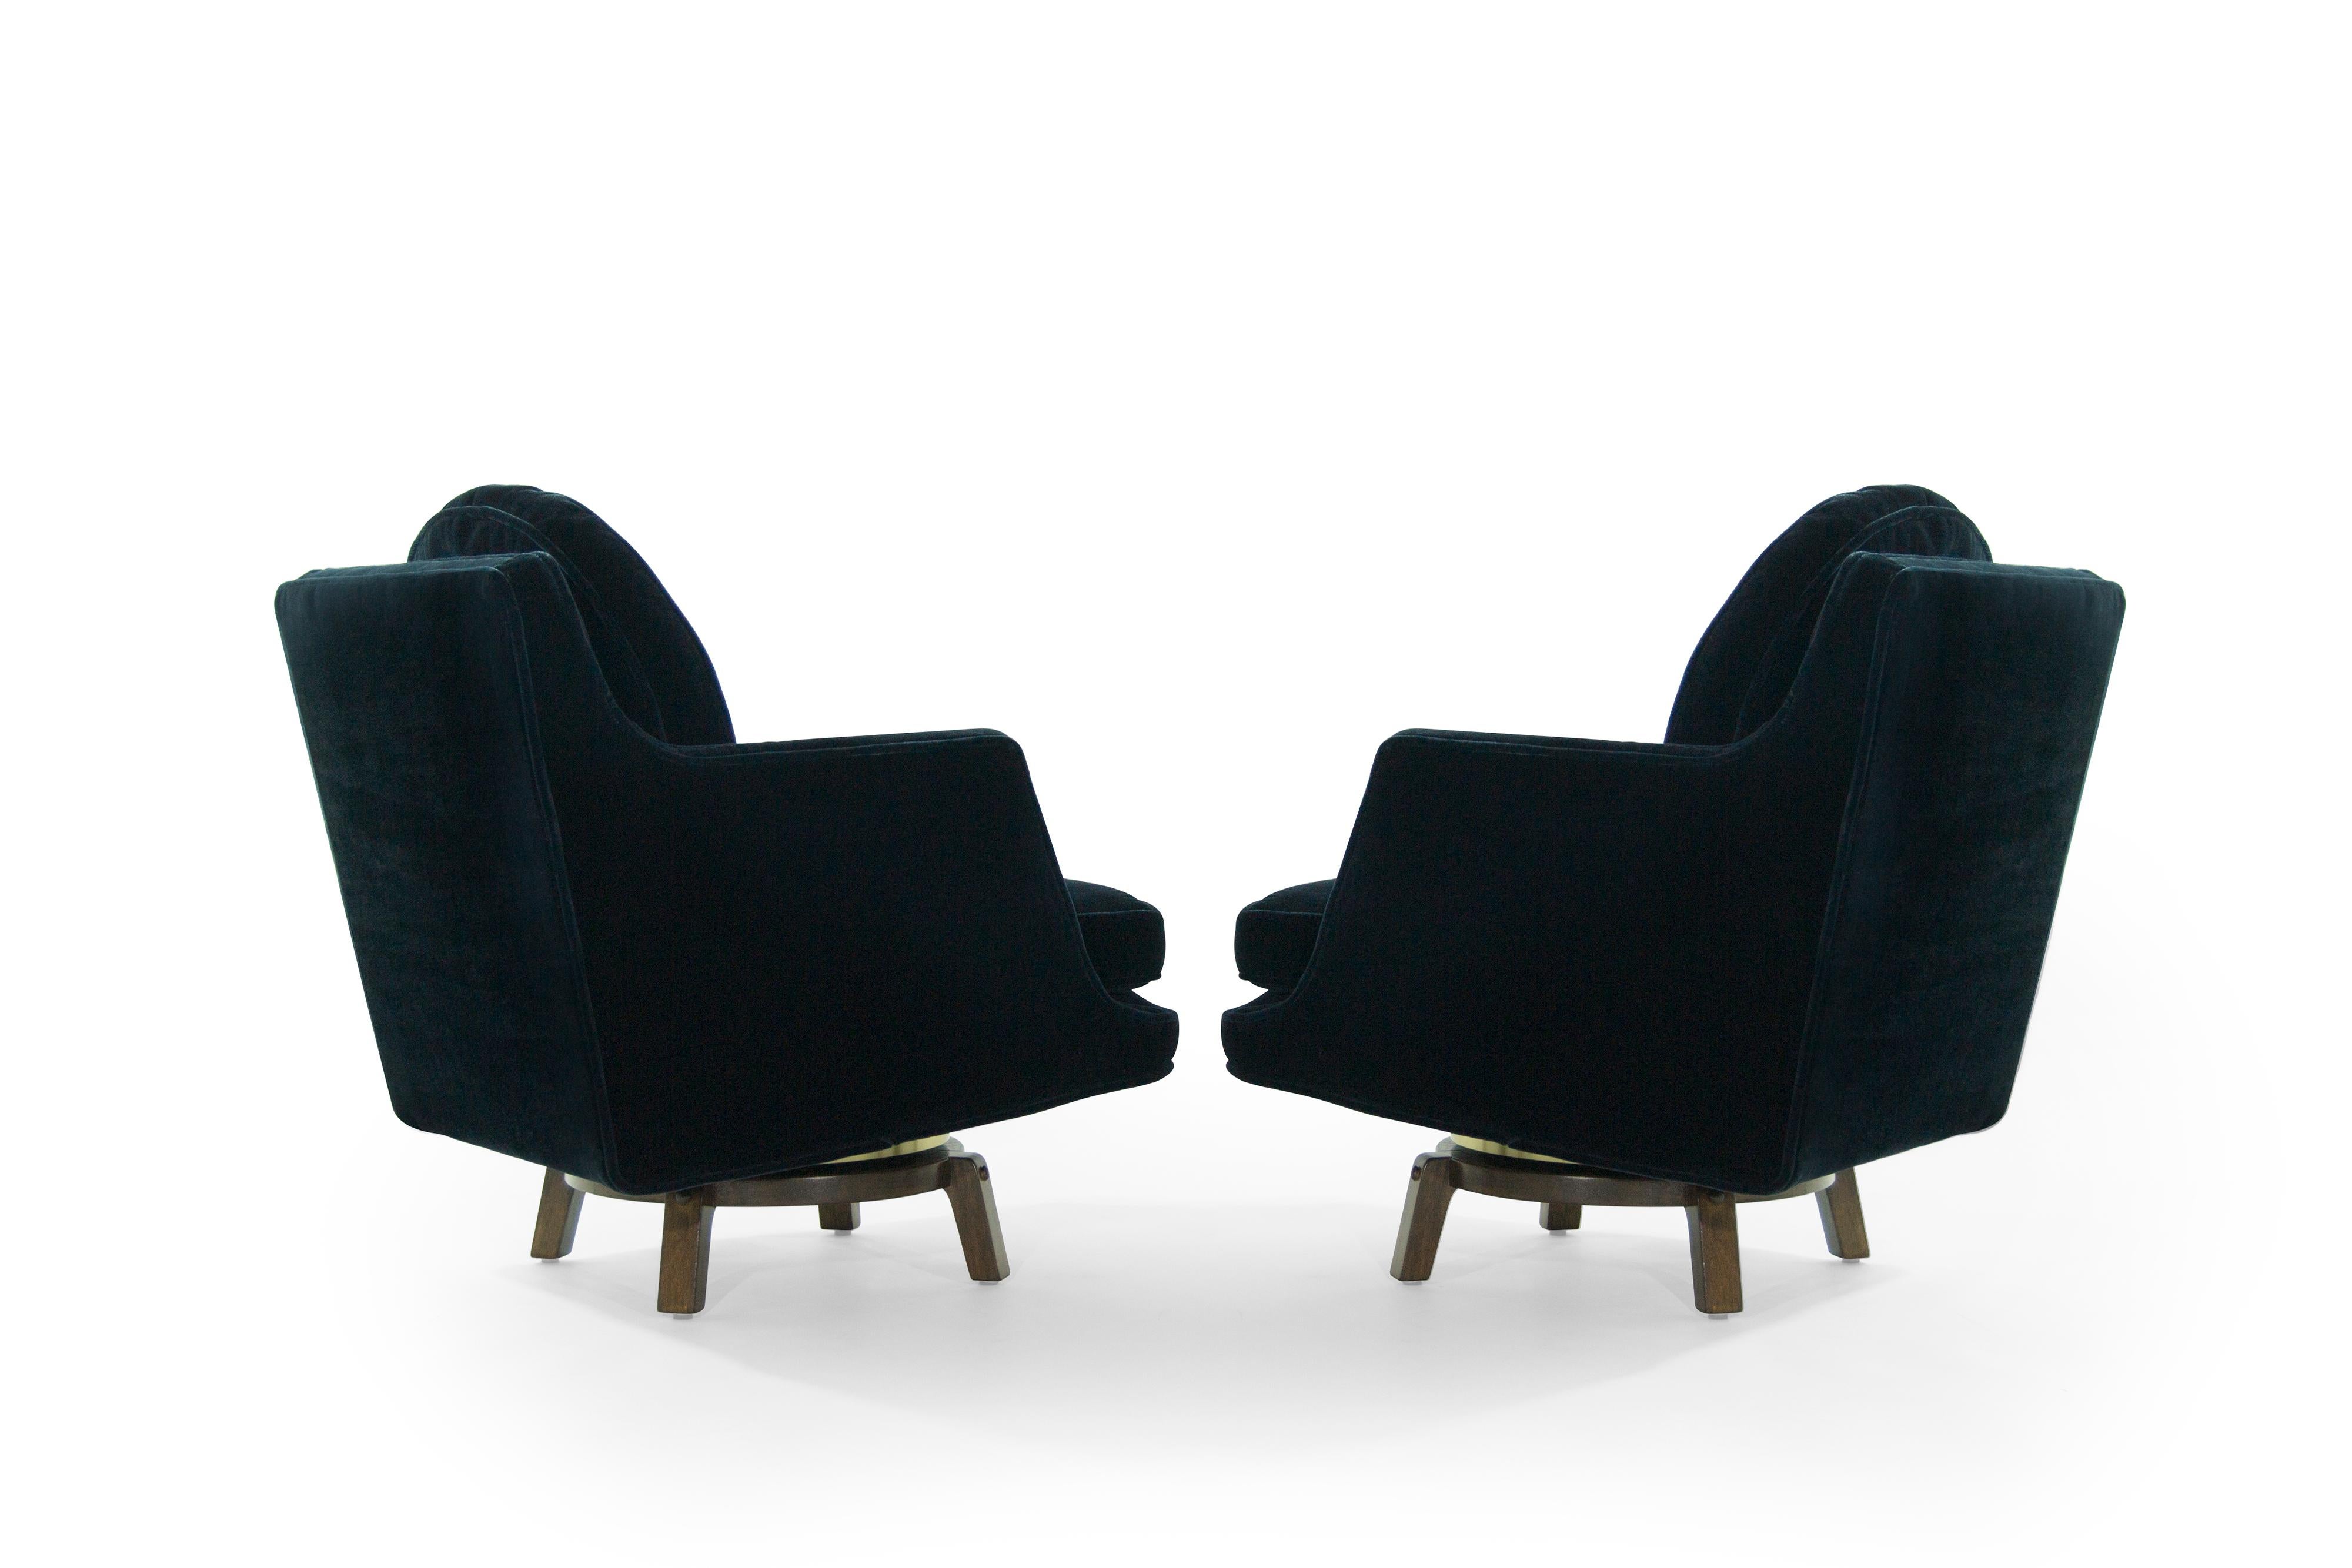 American Brass Accented Swivel Chairs by Edward Wormley for Dunbar, 1950s